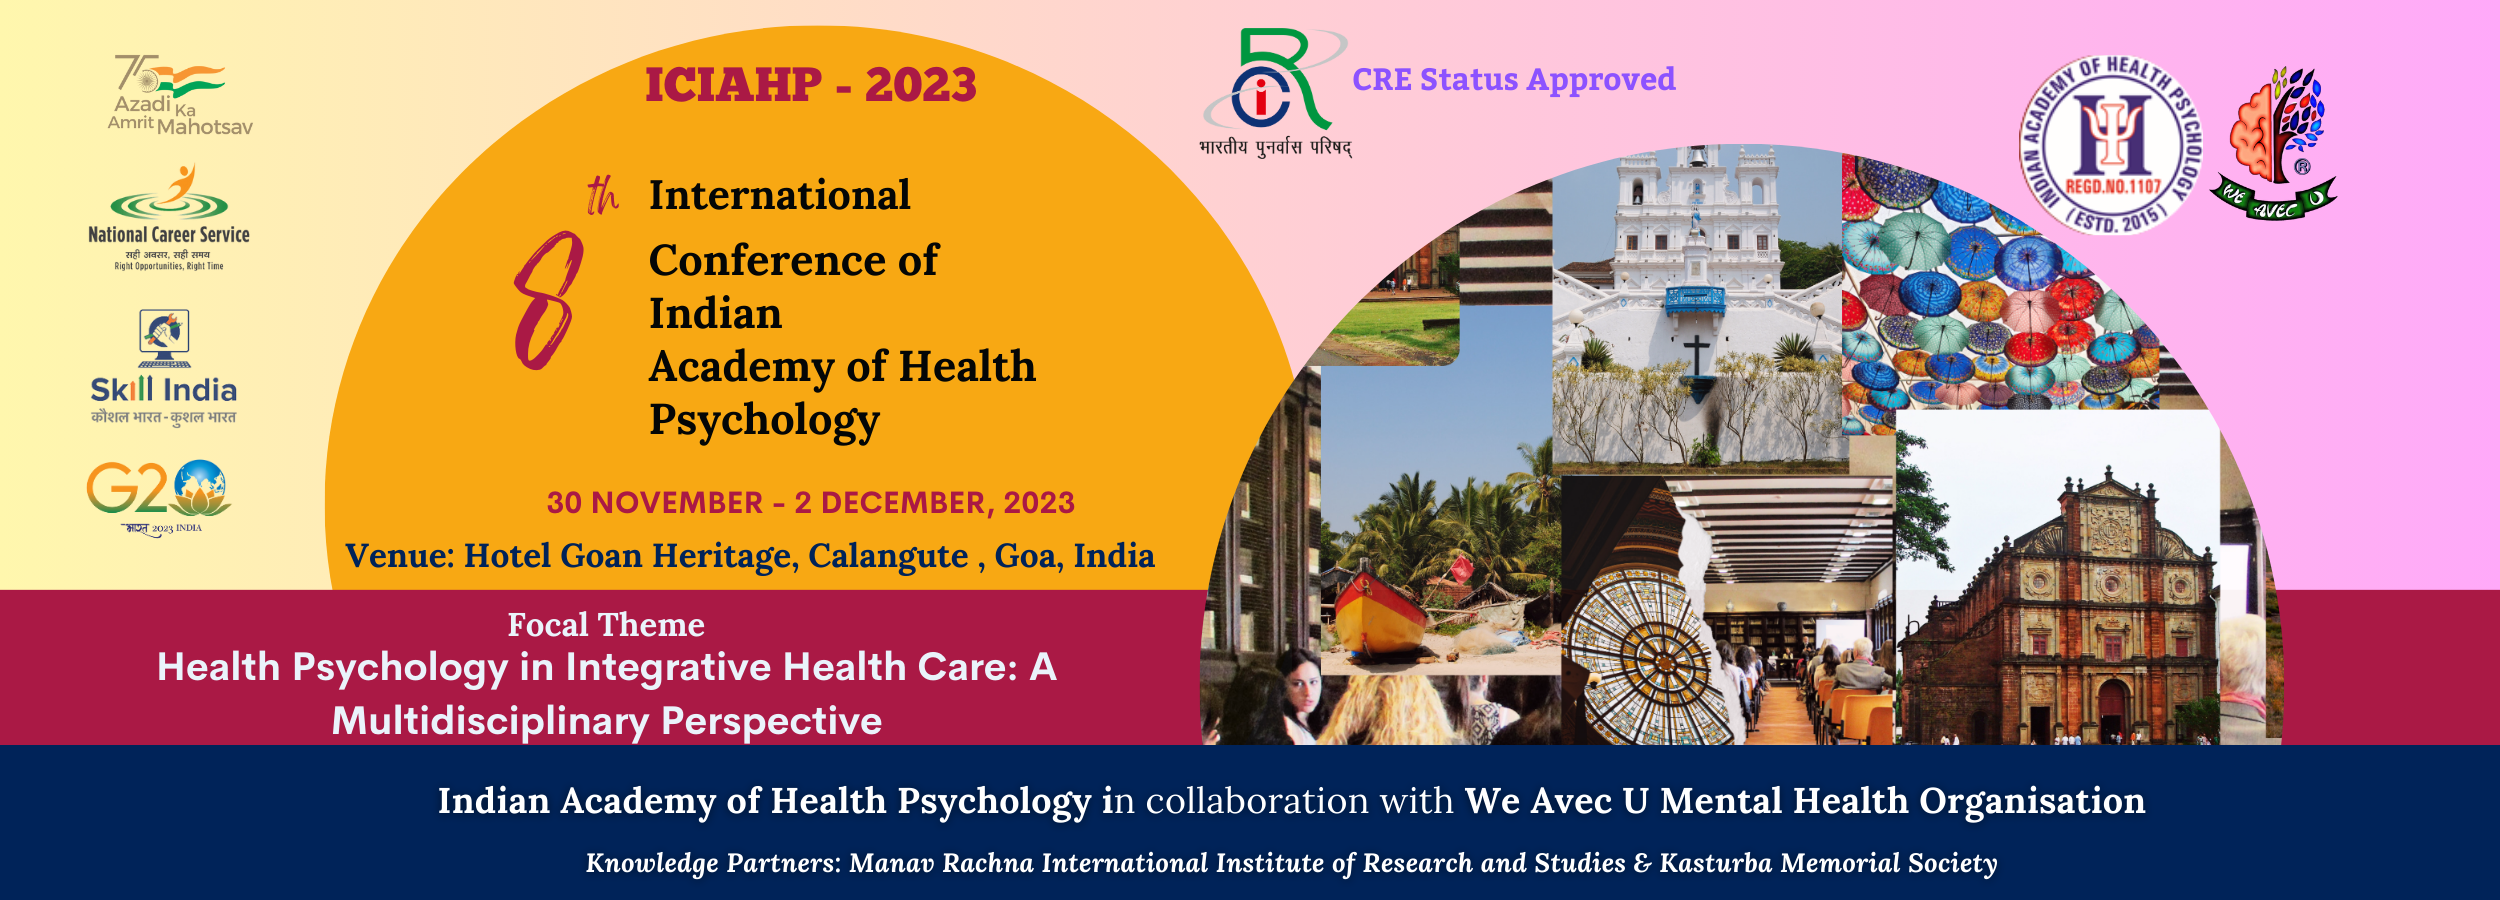 8th International Conference of Indian Academy of Health Psychology, North Goa, Goa, India